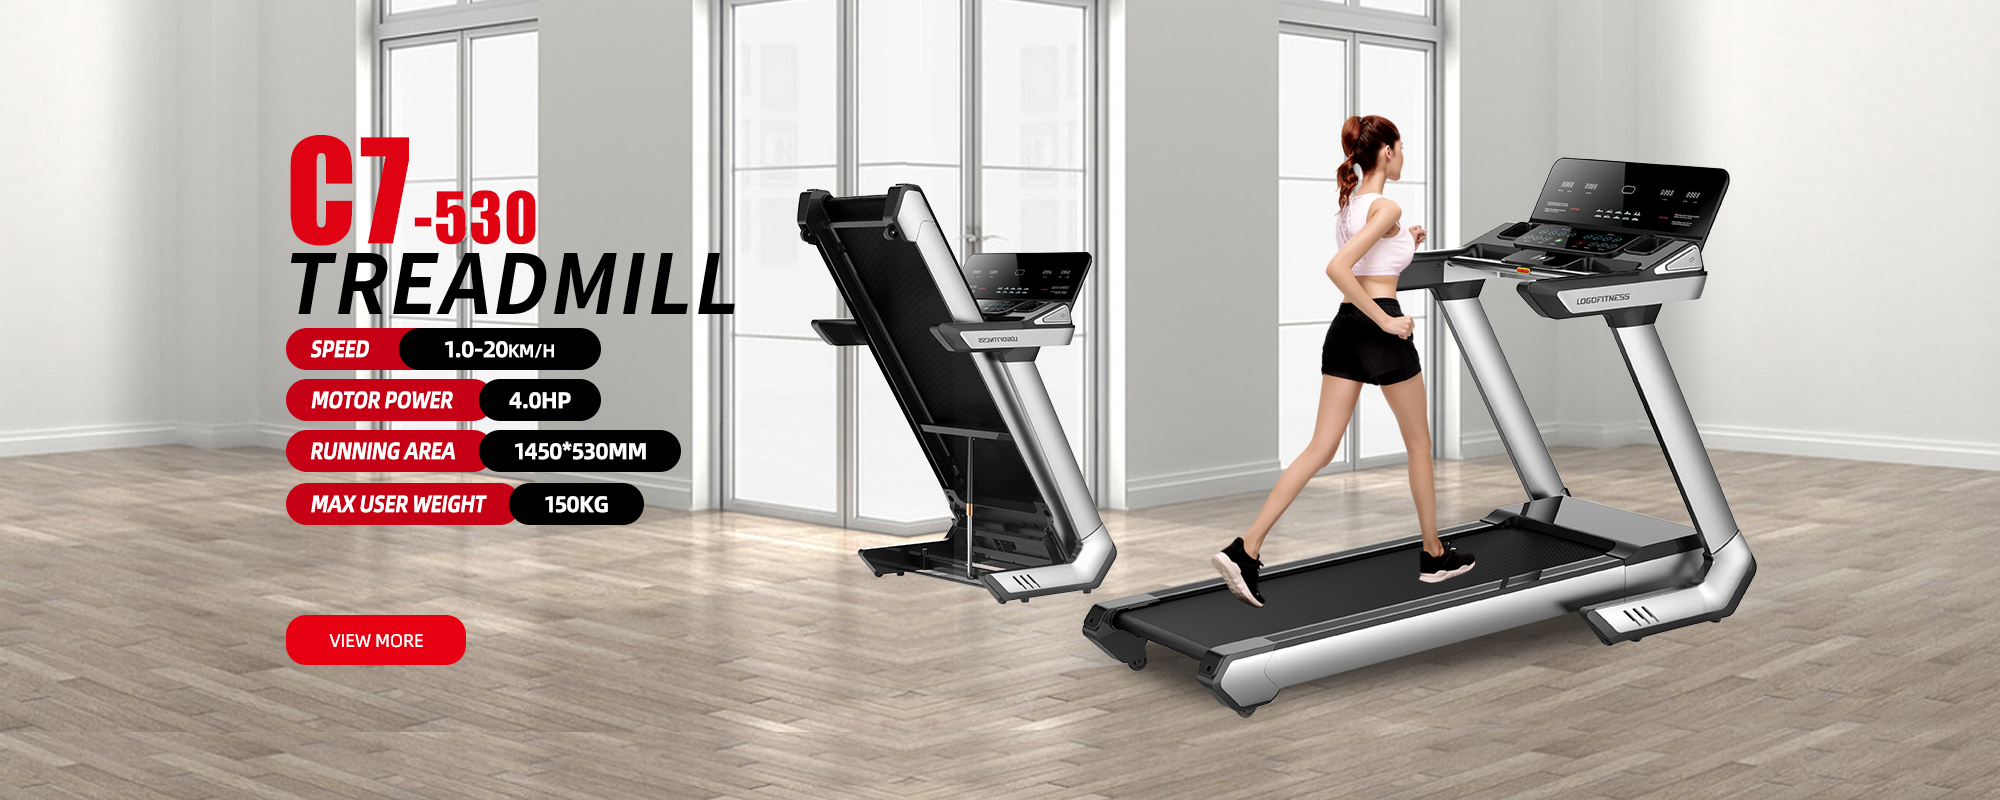 Do you know enough about treadmills?